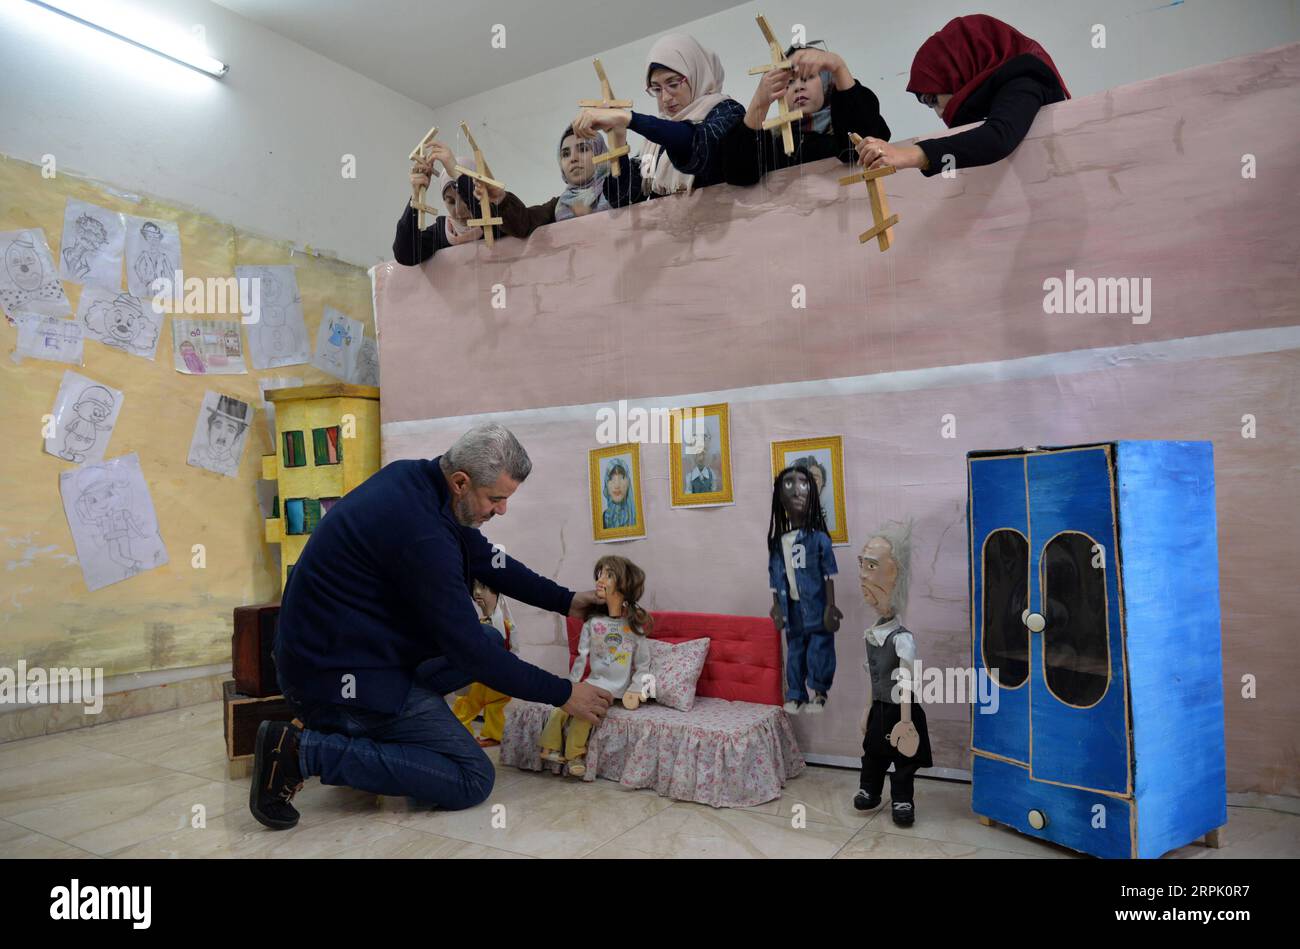 191223 -- GAZA, Dec. 23, 2019 Xinhua -- Mahdi Karira Front and his team members works on their marionettes at his office in Gaza City, on Dec. 23, 2019. Mahdi Karira, a 39-year-old master at making the marionette, spent 6 months on training a group of 8 girls and 2 young men to make puppets and perform puppet theater shows for children, in an attempt to promote the art of puppet theater in the Gaza Strip. Photo by Rizek Abdeljawad/Xinhua MIDEAST-GAZA-ARTIST-PUPPET THEATER PUBLICATIONxNOTxINxCHN Stock Photo